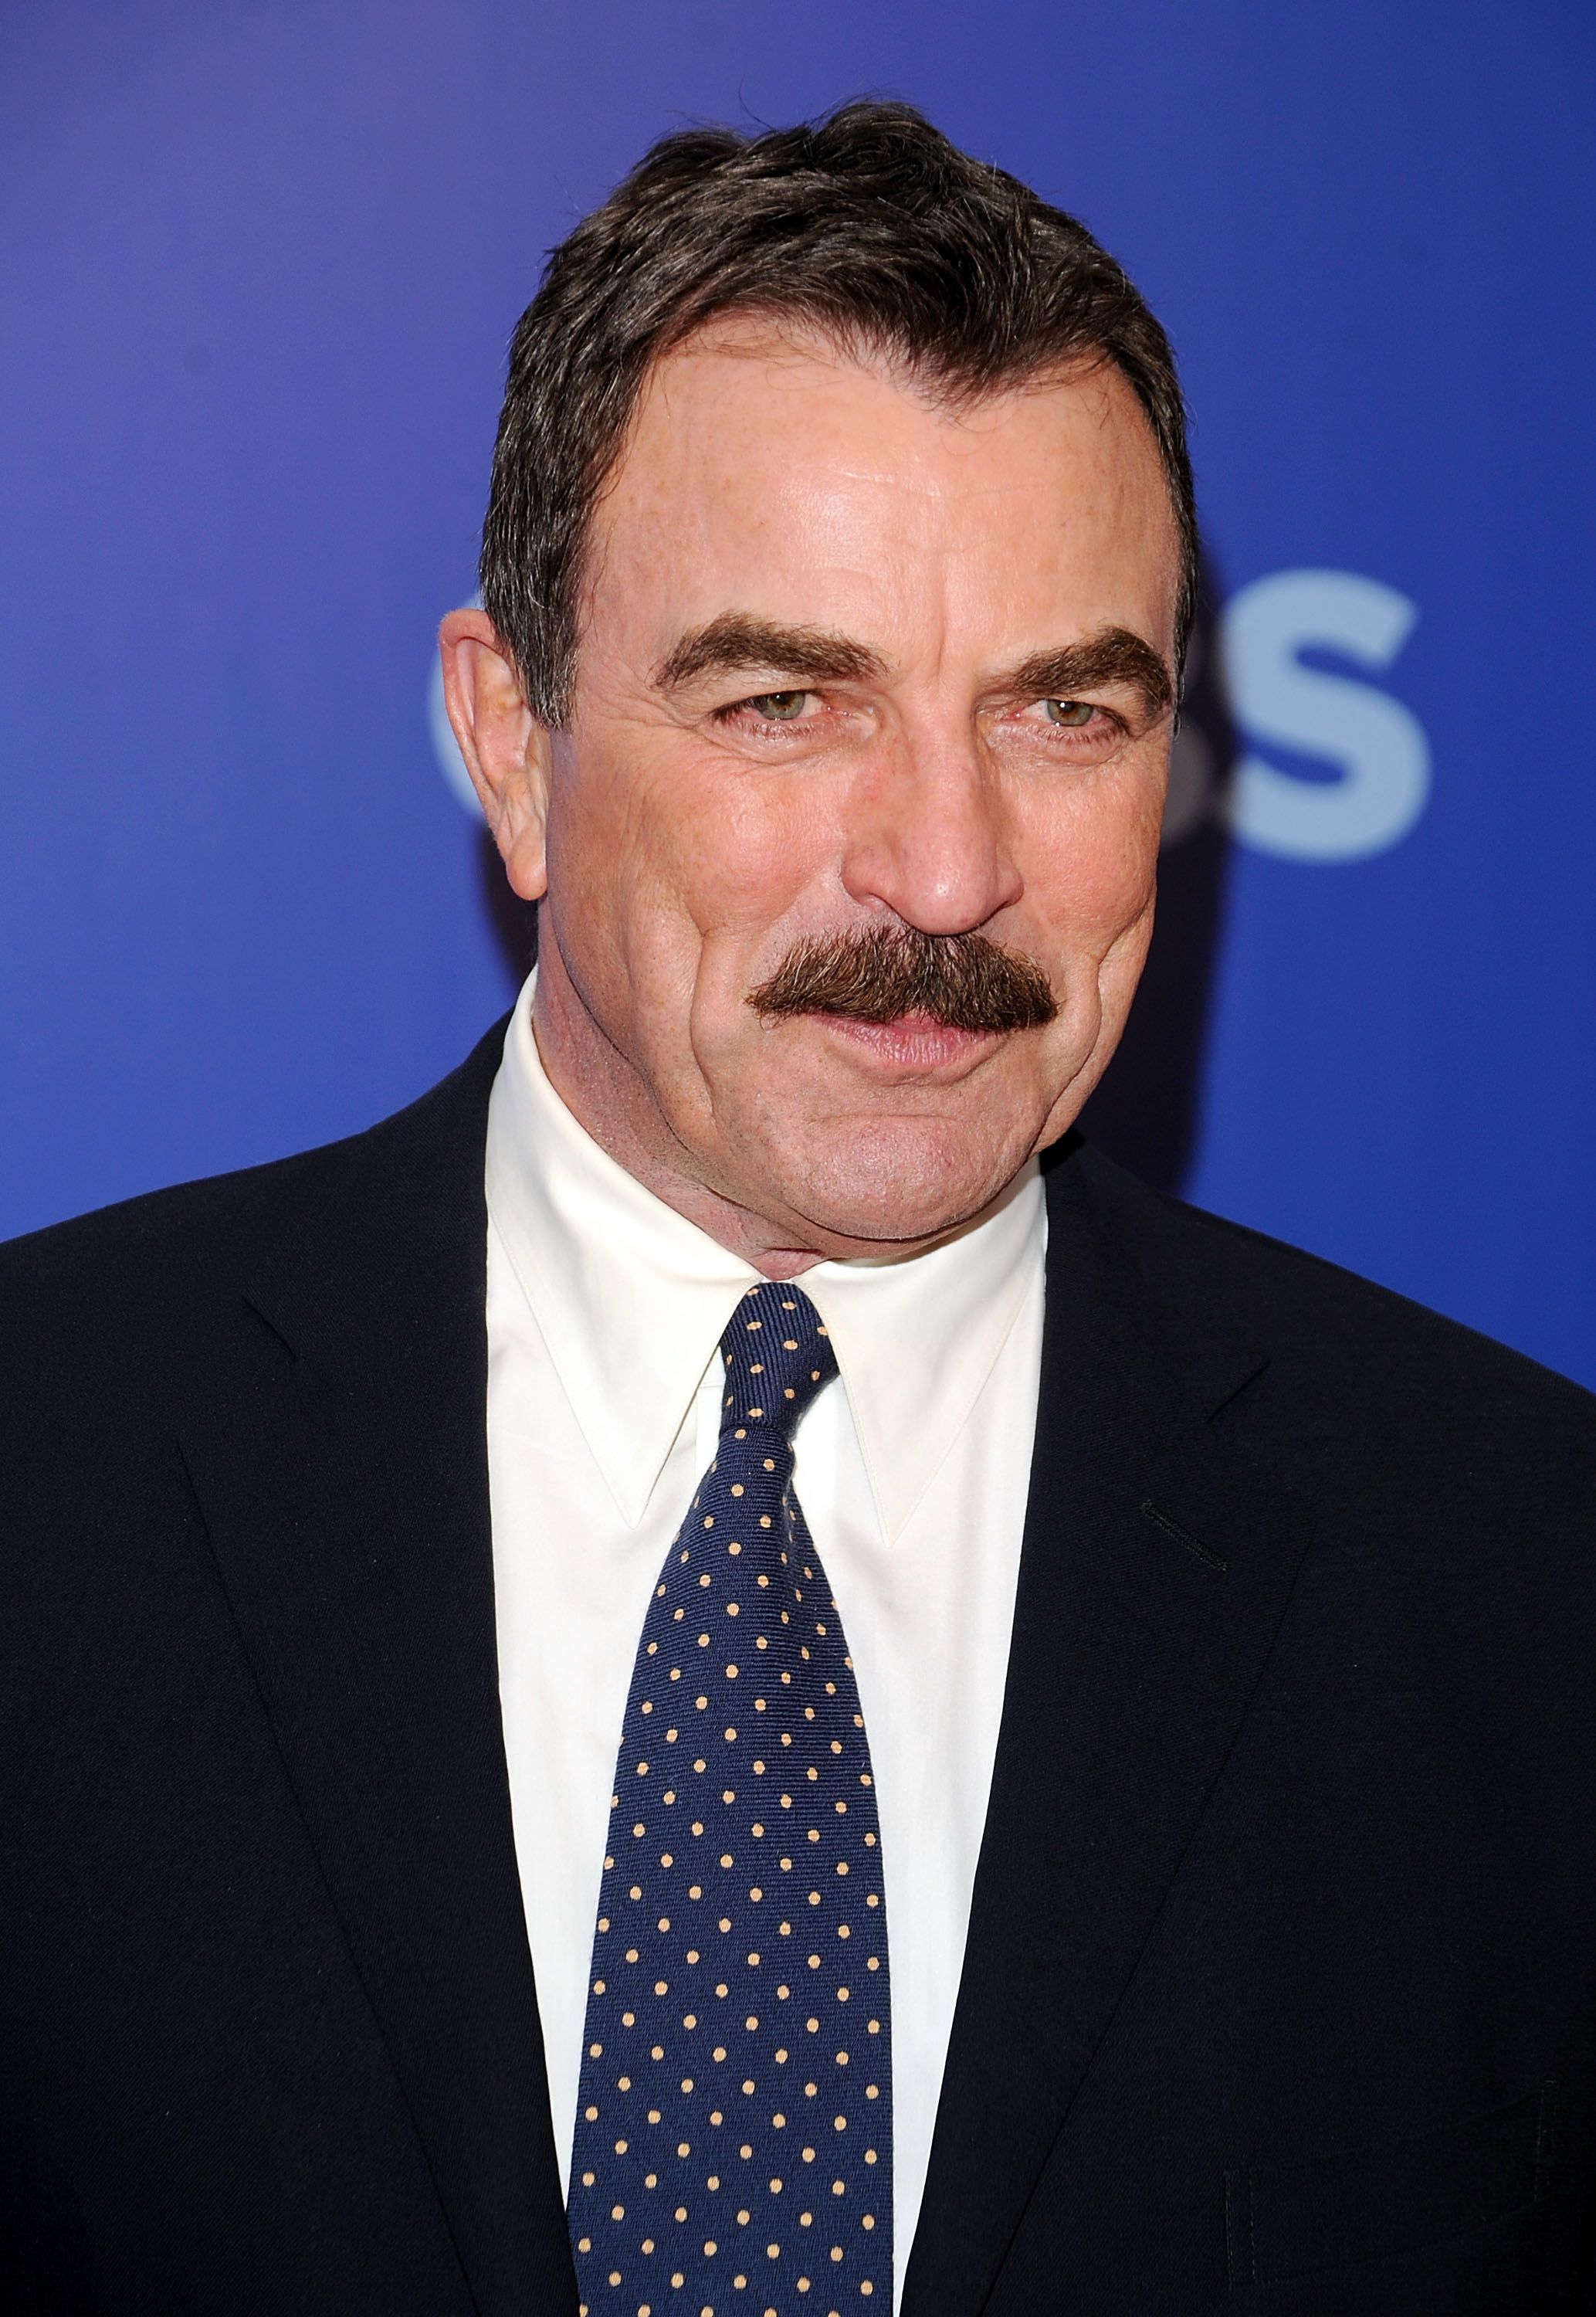 Tom Selleck at CBS UpFront at Damrosch Park, Lincoln Center on May 19, 2010, in New York City | Photo: Andrew H. Walker/Getty Images